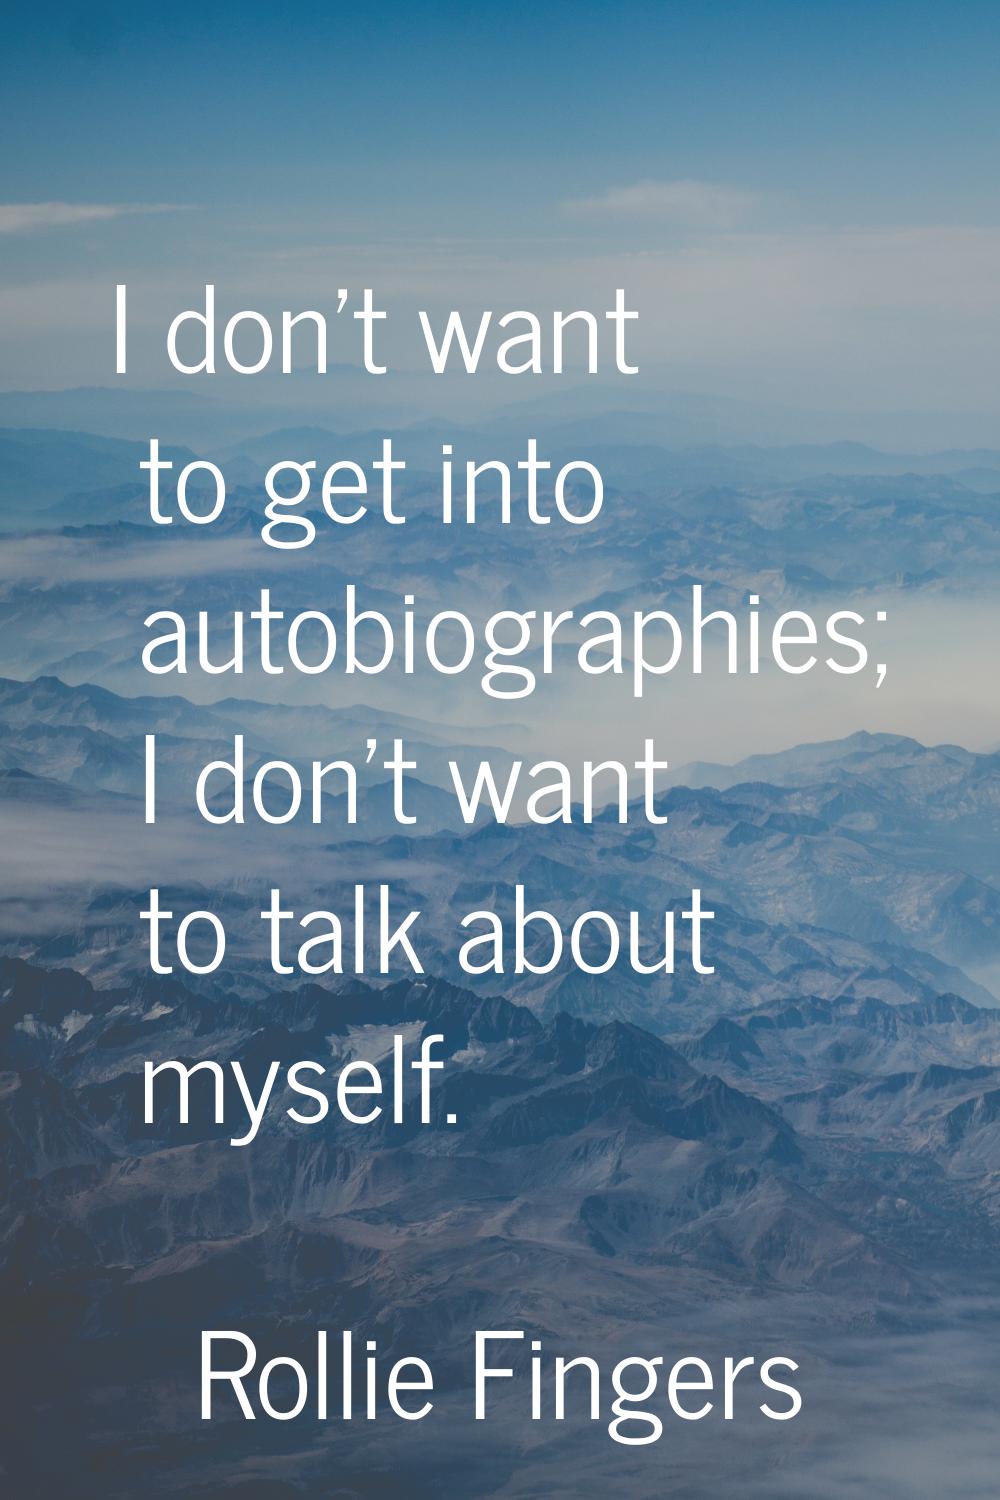 I don't want to get into autobiographies; I don't want to talk about myself.